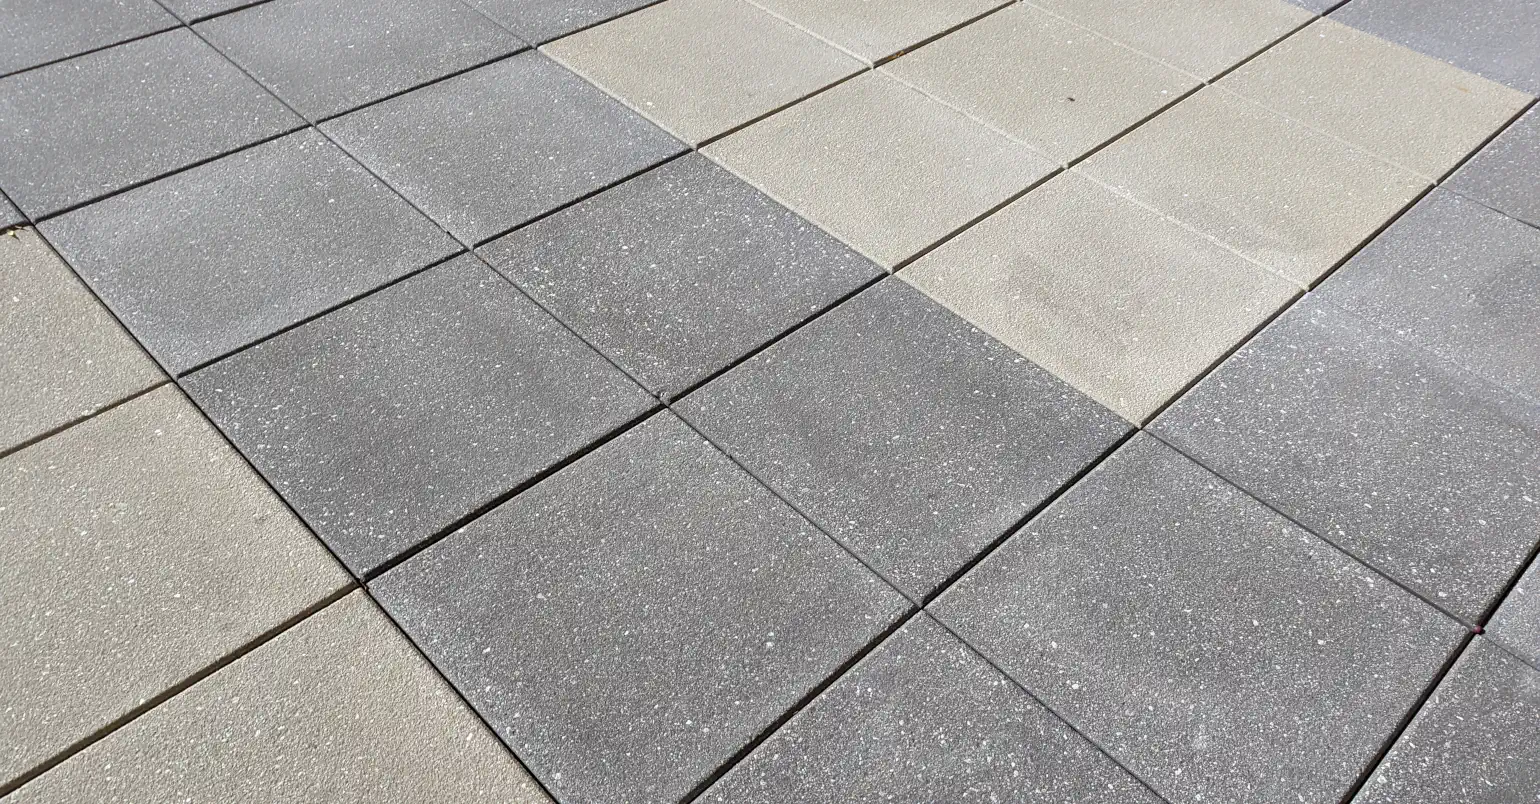 Angle view of square paving stones in two colors, in a pattern